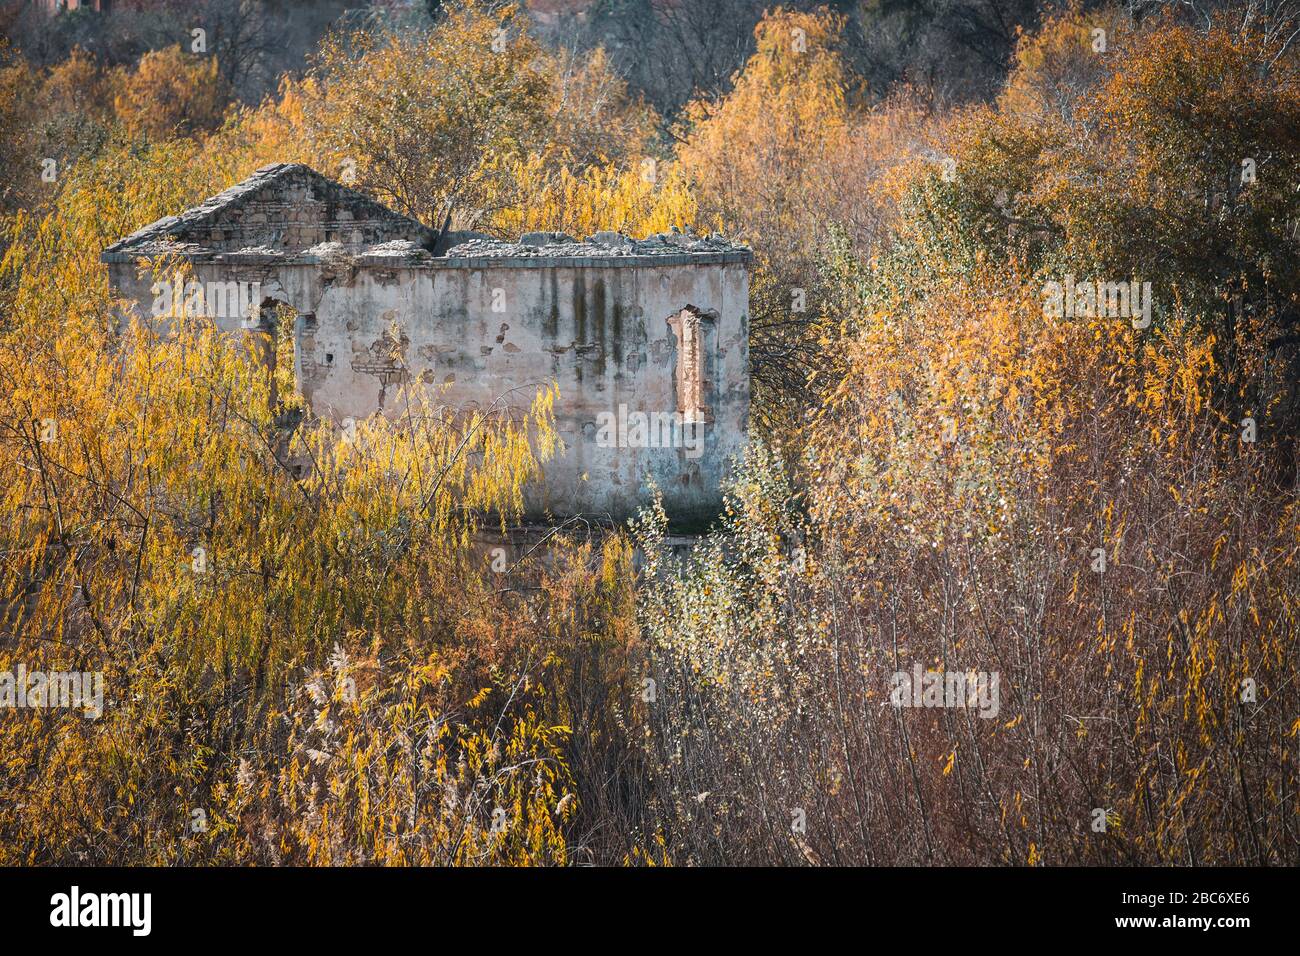 Abandoned Building in the Rural Area by the River Guadalquivir at Cordoba, Spain Stock Photo